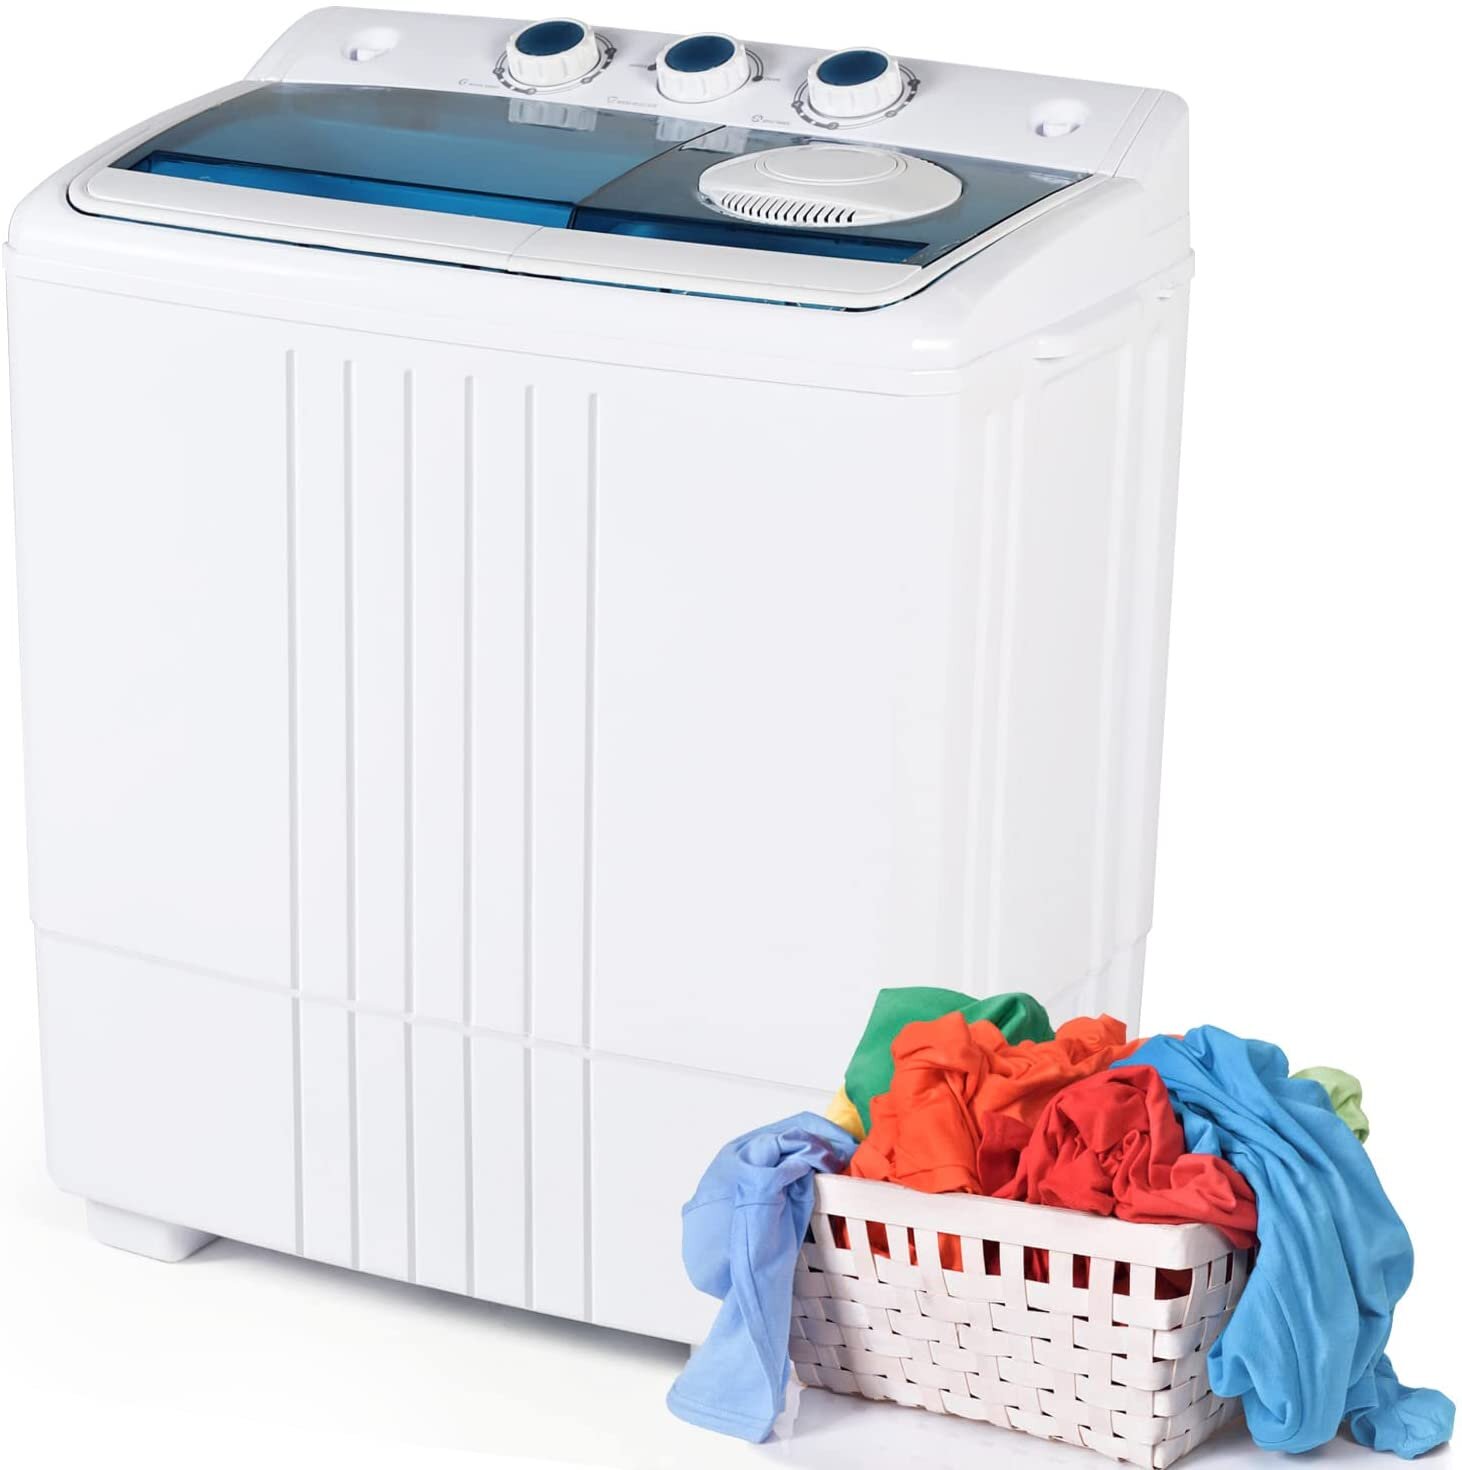 Mini Portable Washing Machine Small Semi-Automatic Combined Washing Machine for Camper Car Dormitory Compact Non-Electric Manual Rotary Dryer 